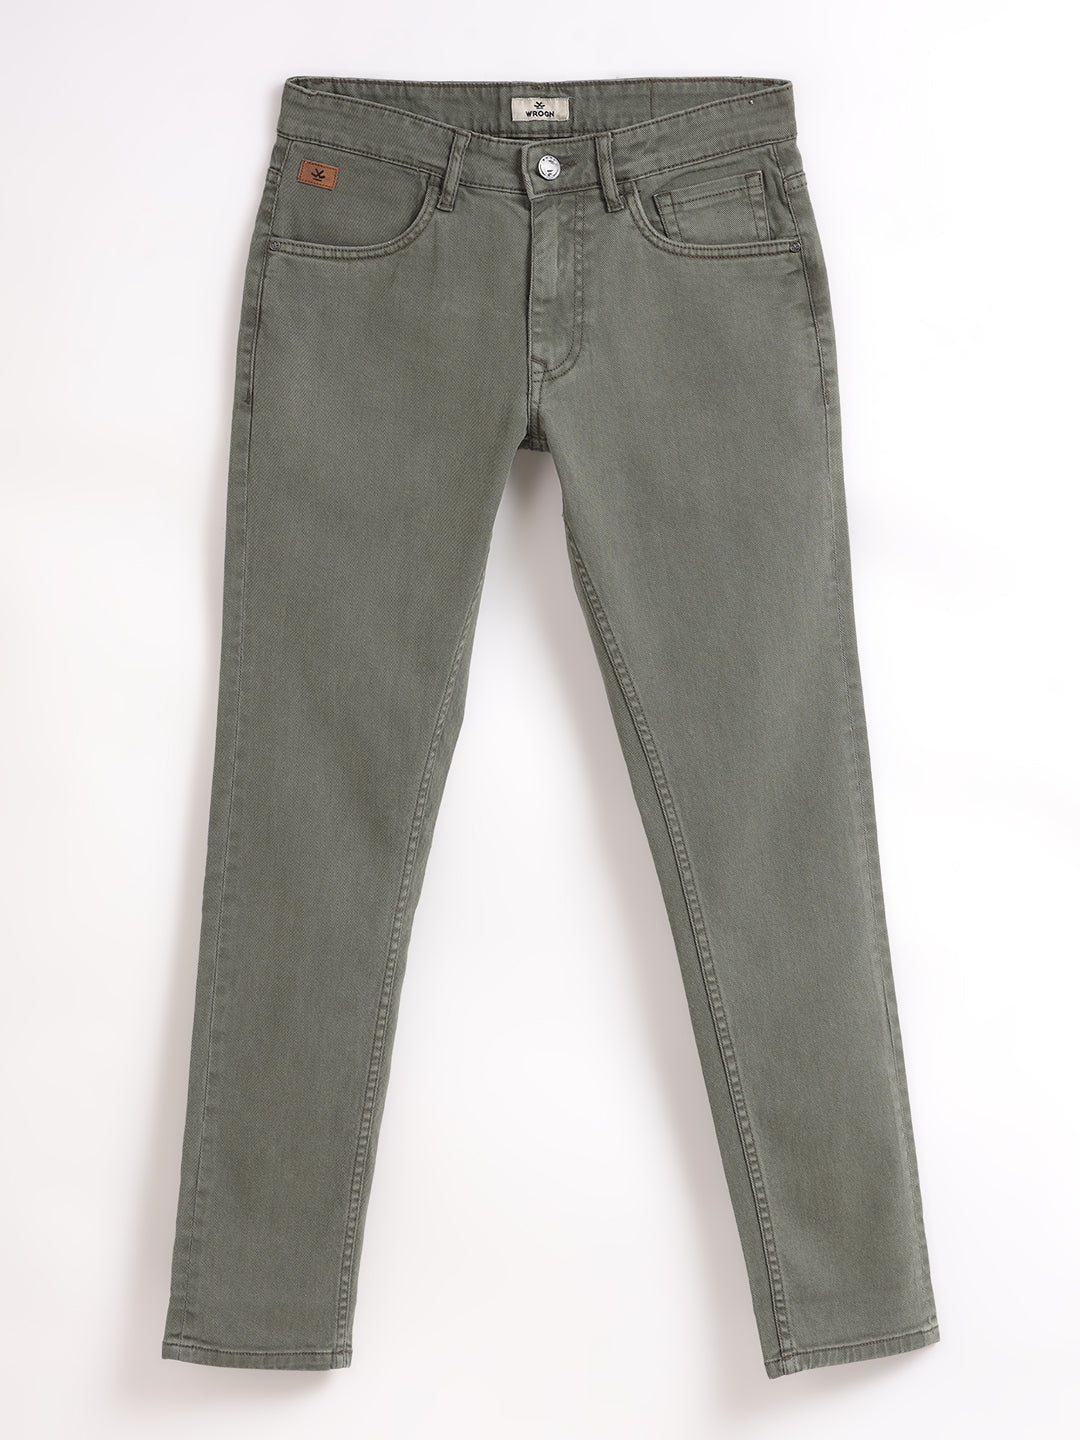 Solid Olive Tapered Jeans